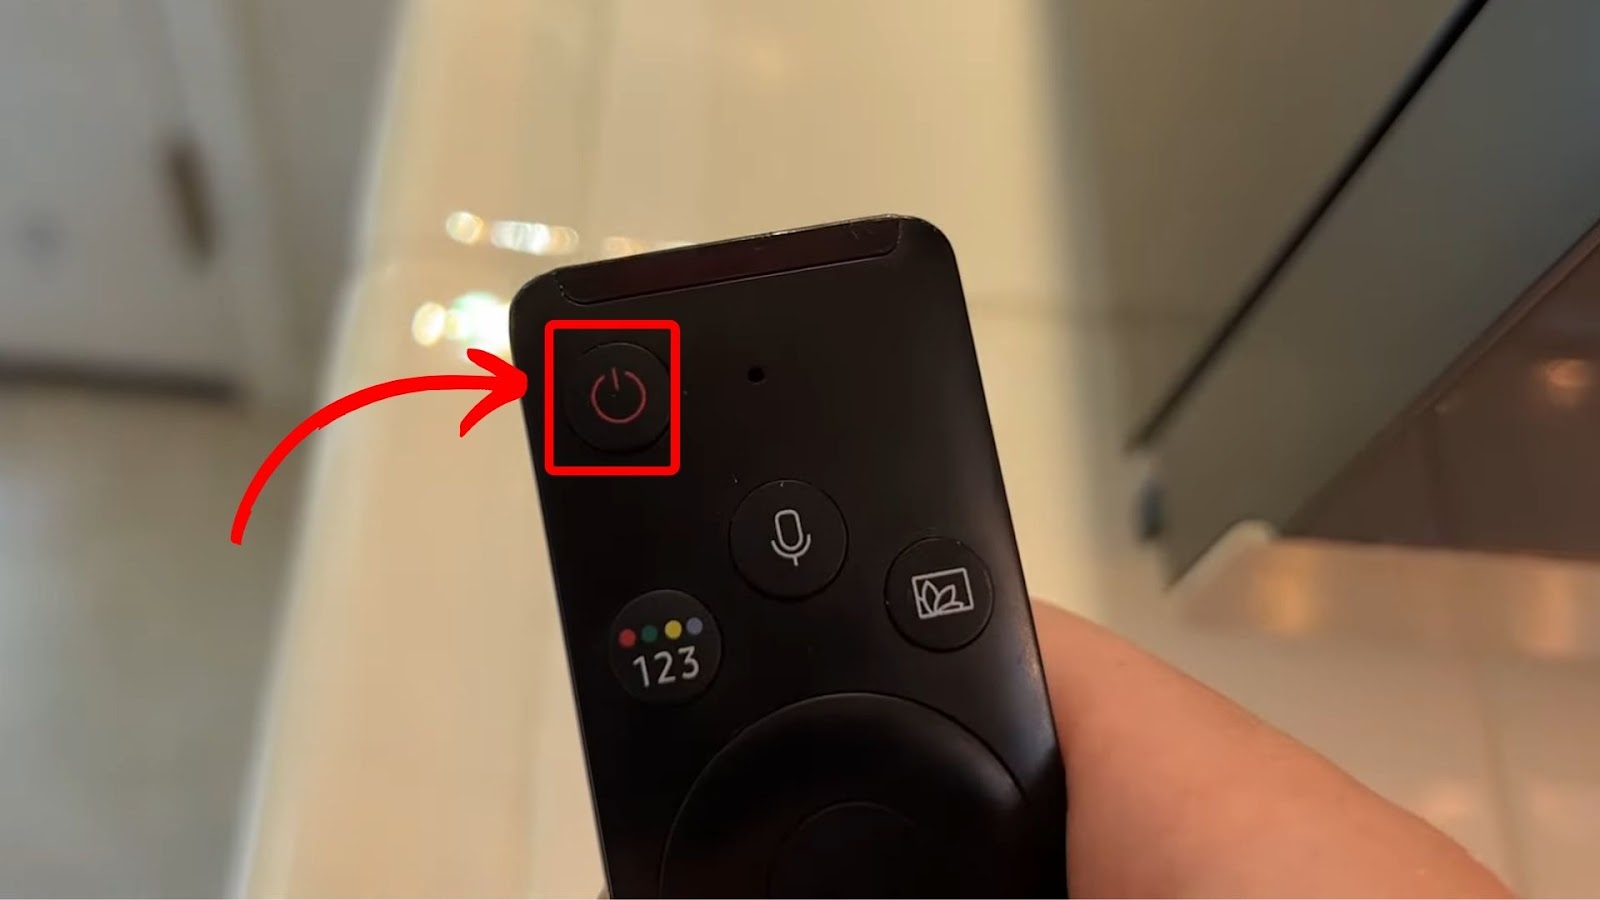 How To Reset Samsung TV Blinking Red